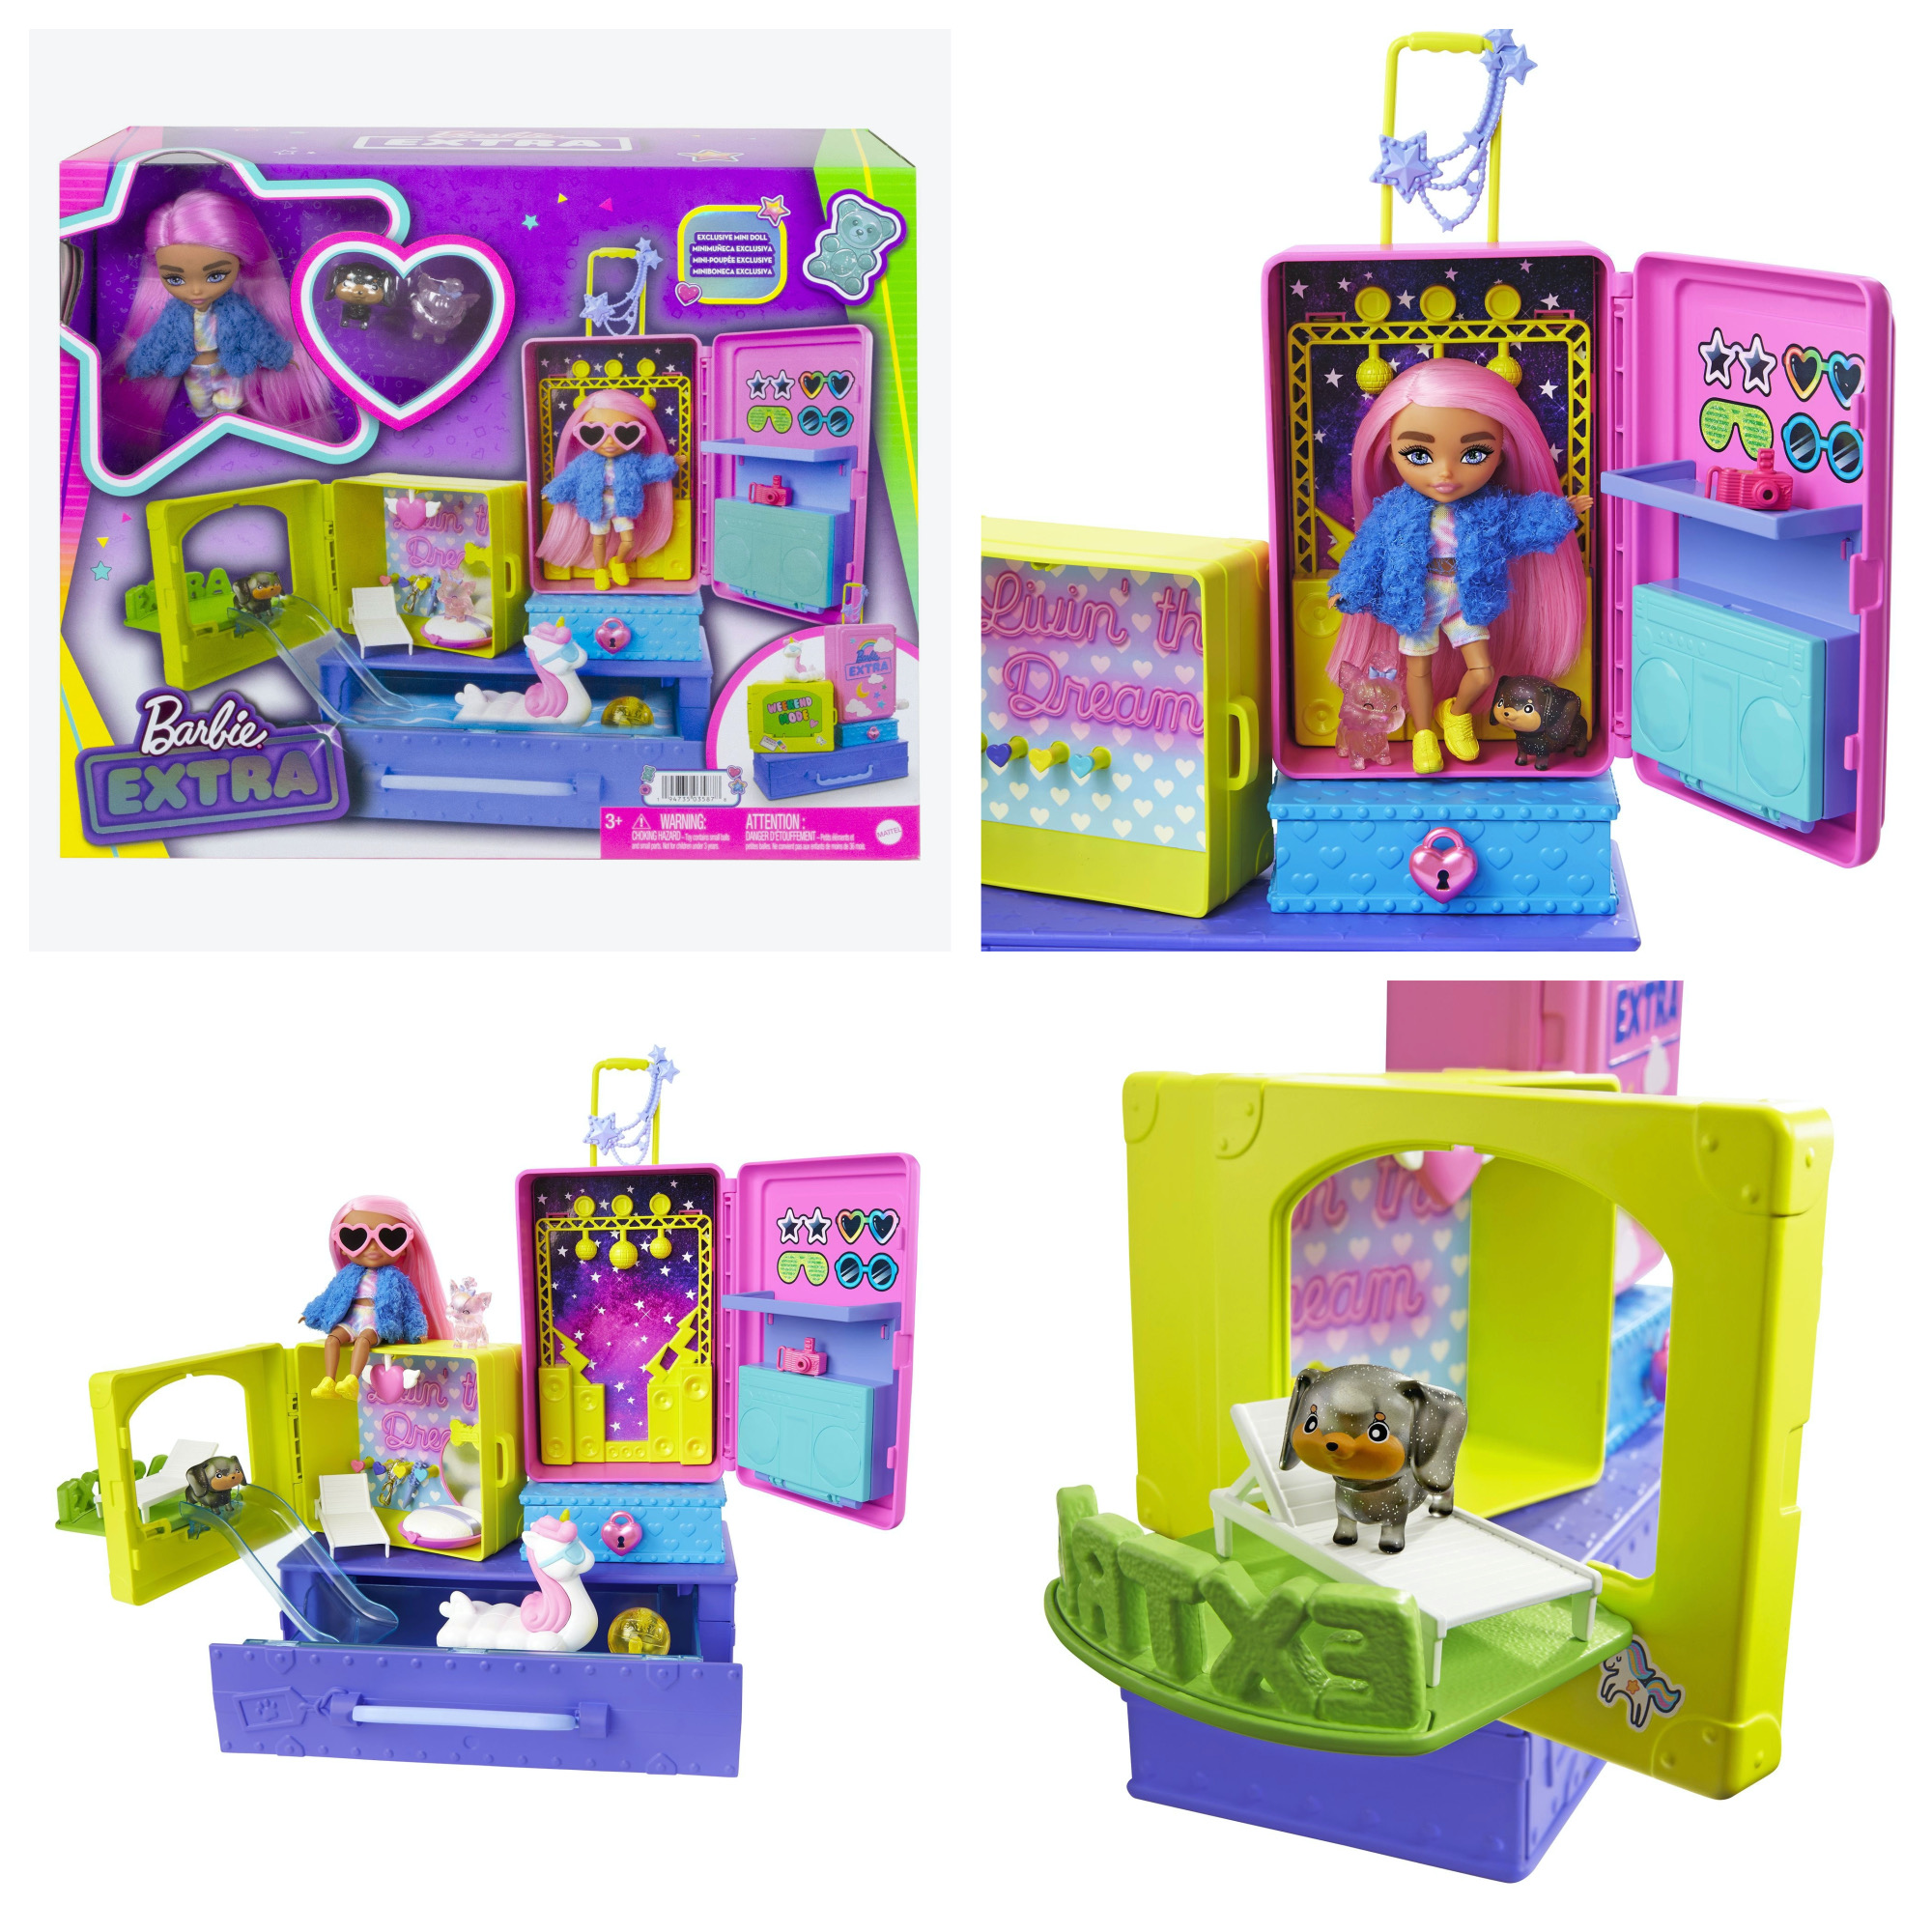 New Barbie Extra Minis are little, cute, have cool accessories and